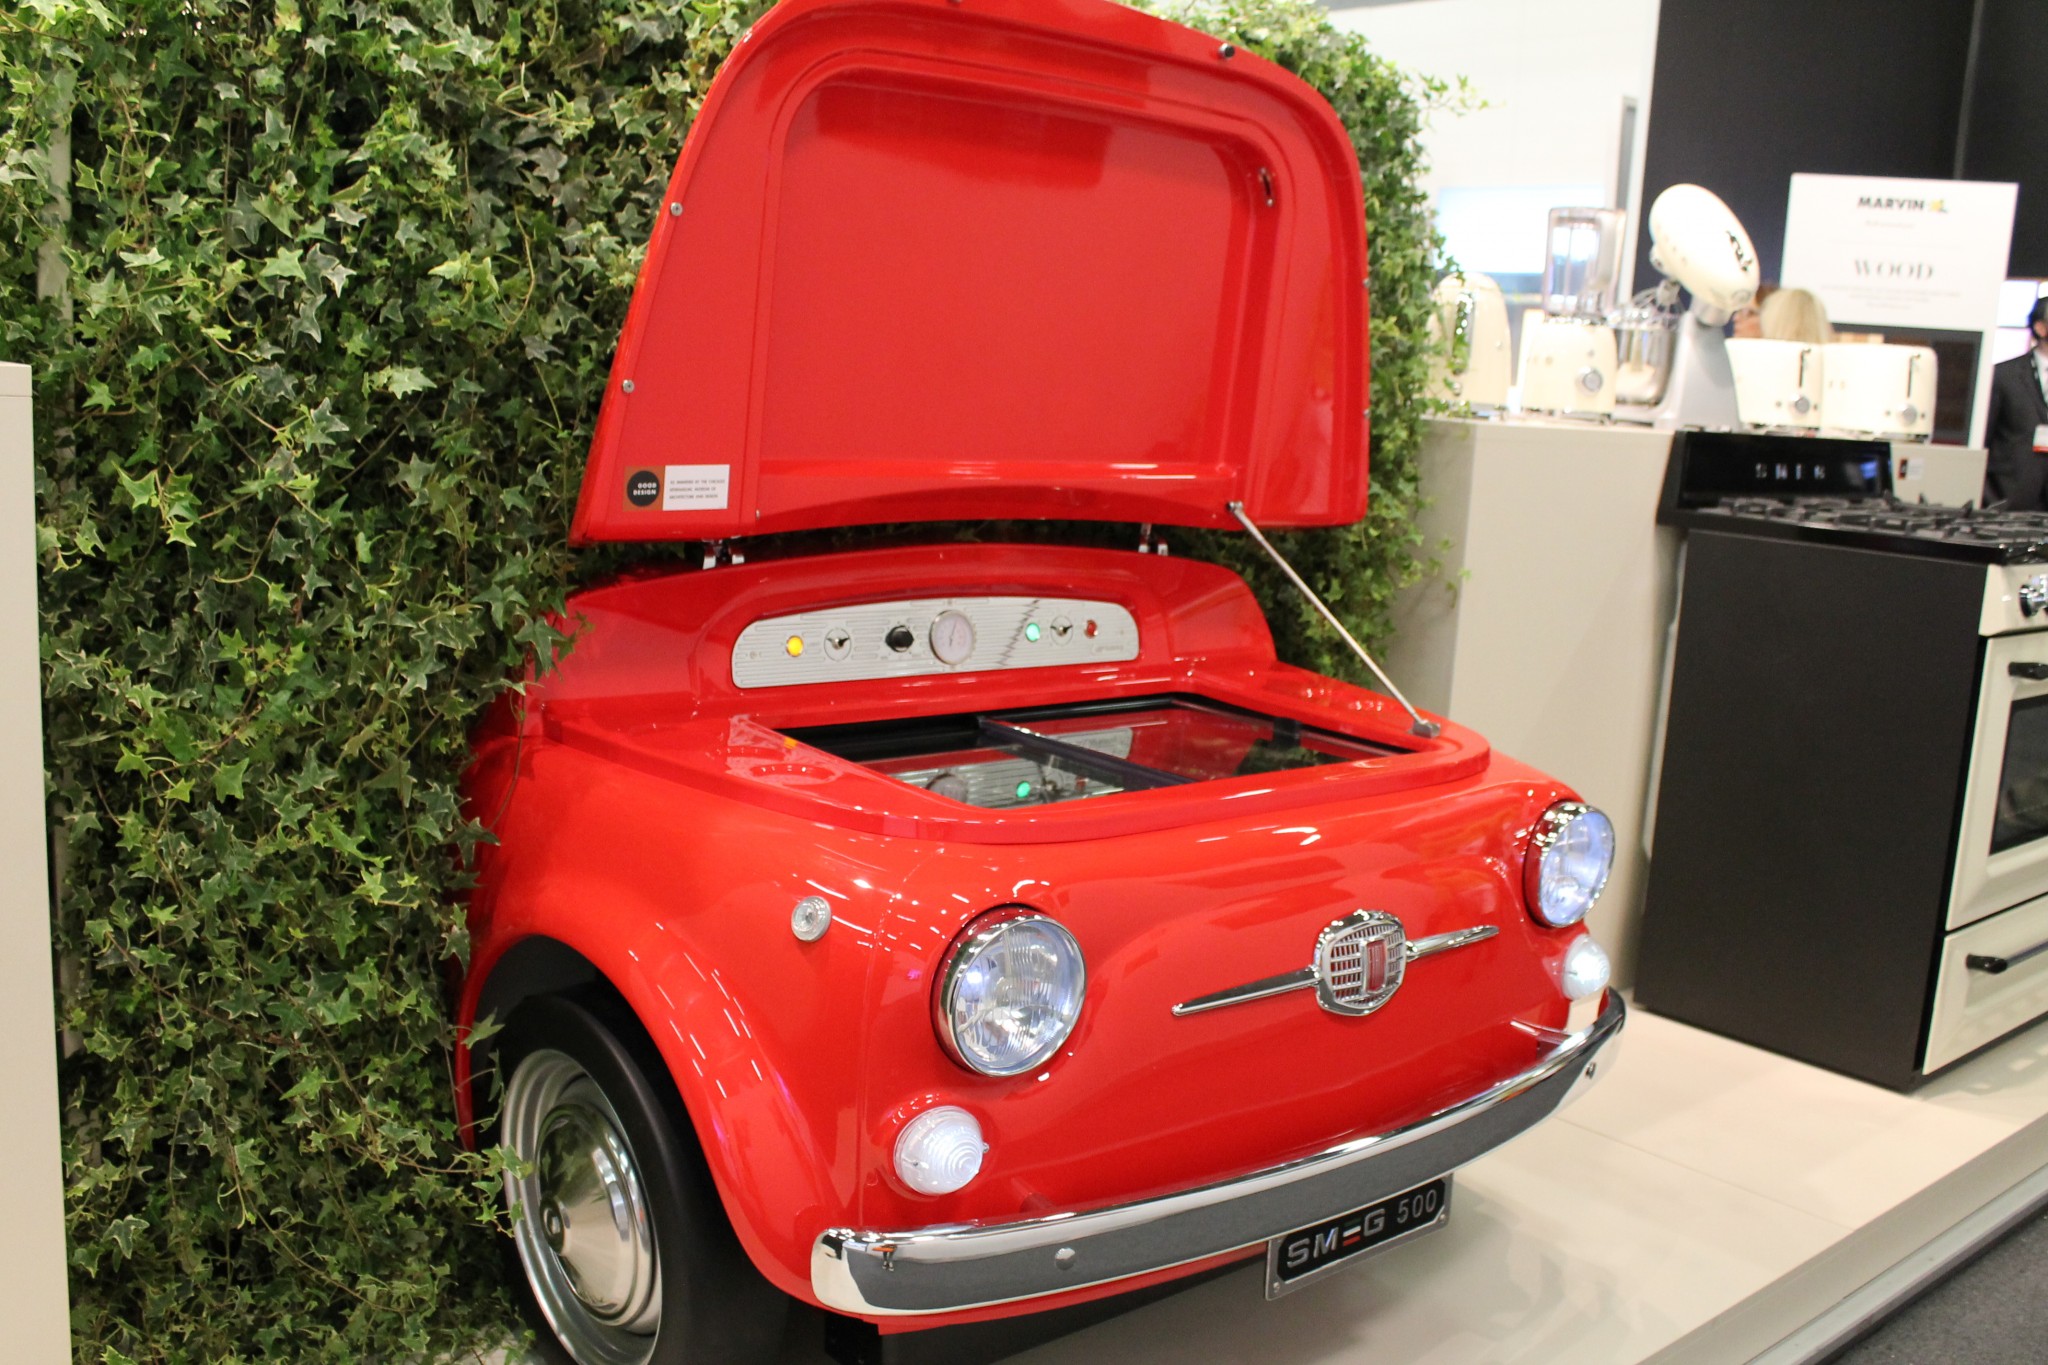 car shaped retro cooler by smeg at architectural home design show 2015 nyc